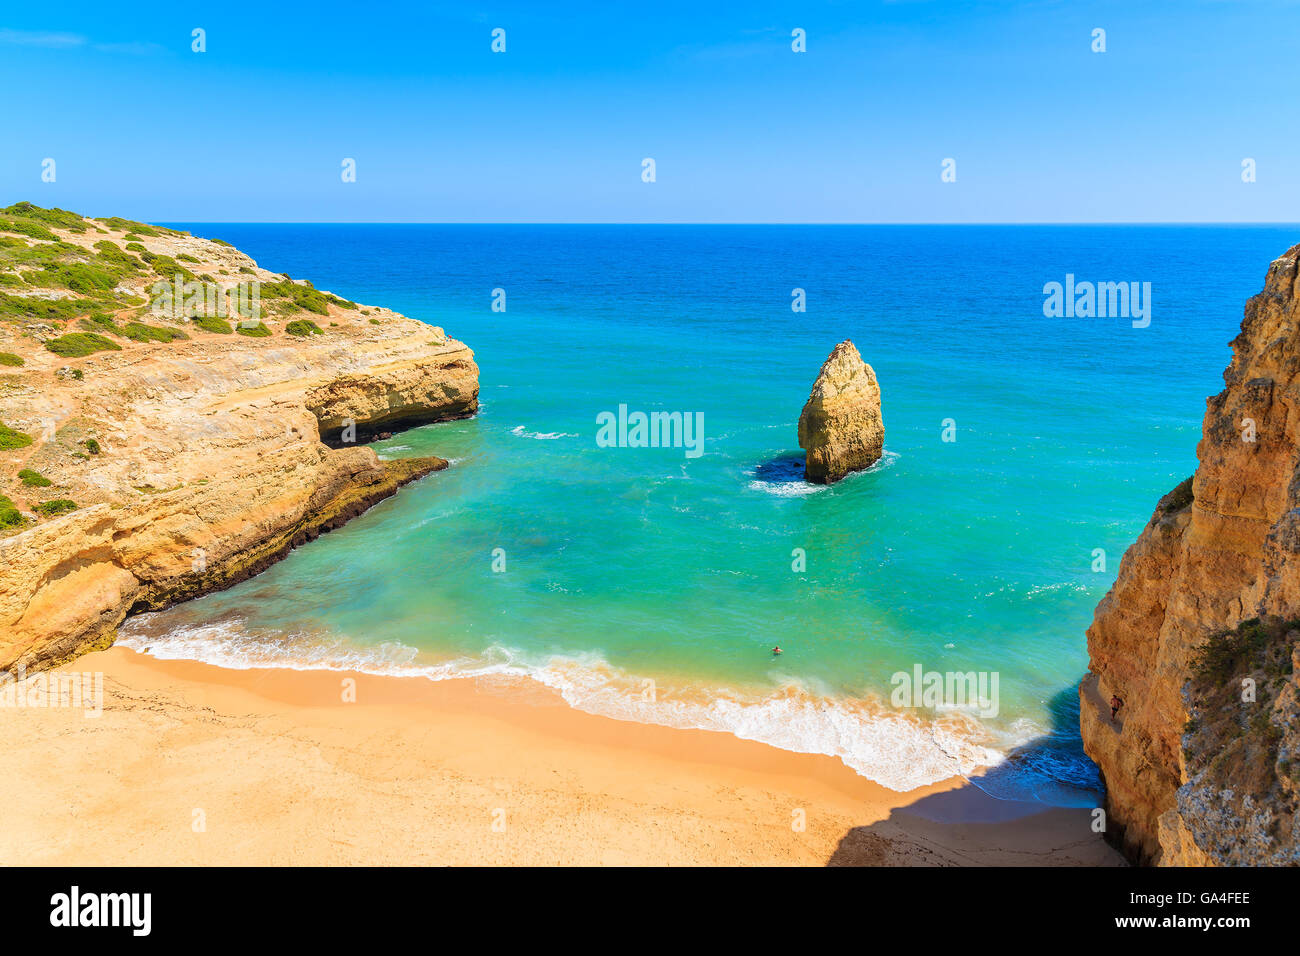 A view of beautiful sandy beach from high vantage point near Carvoeiro town, Portugal Stock Photo